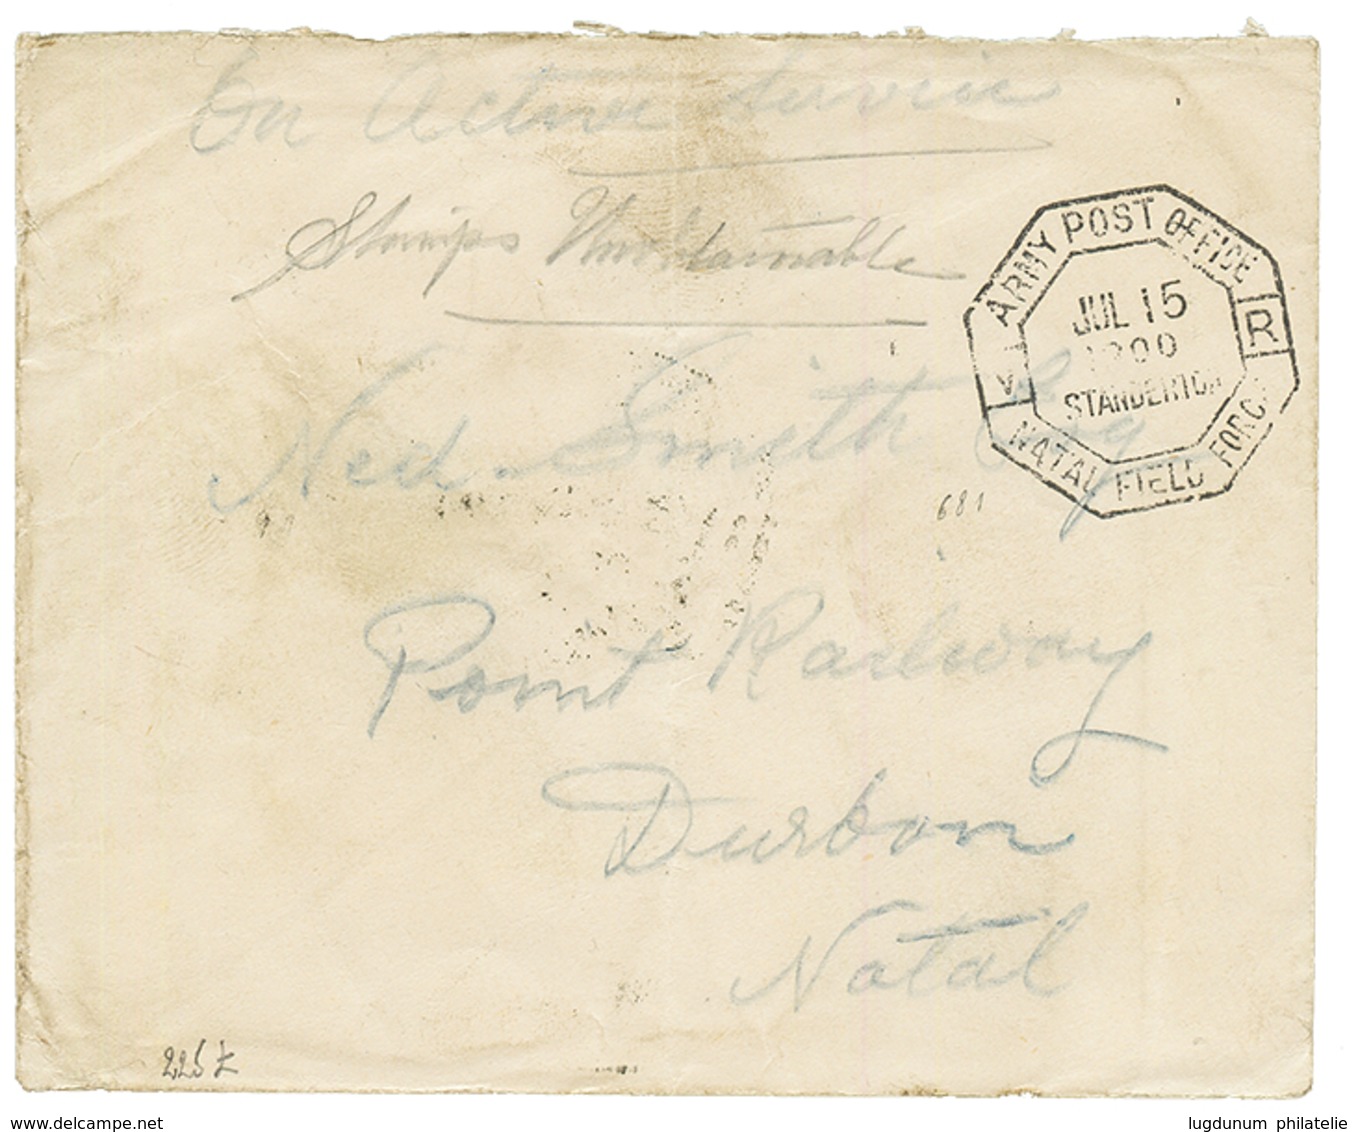 BOER WAR : 1900 Cachet ARMY POST OFFICE NATAL FIELD FORCE + " STAMPS UNOBTAINABLE" On Envelope To NATAL. Scarce. Vvf. - Unclassified